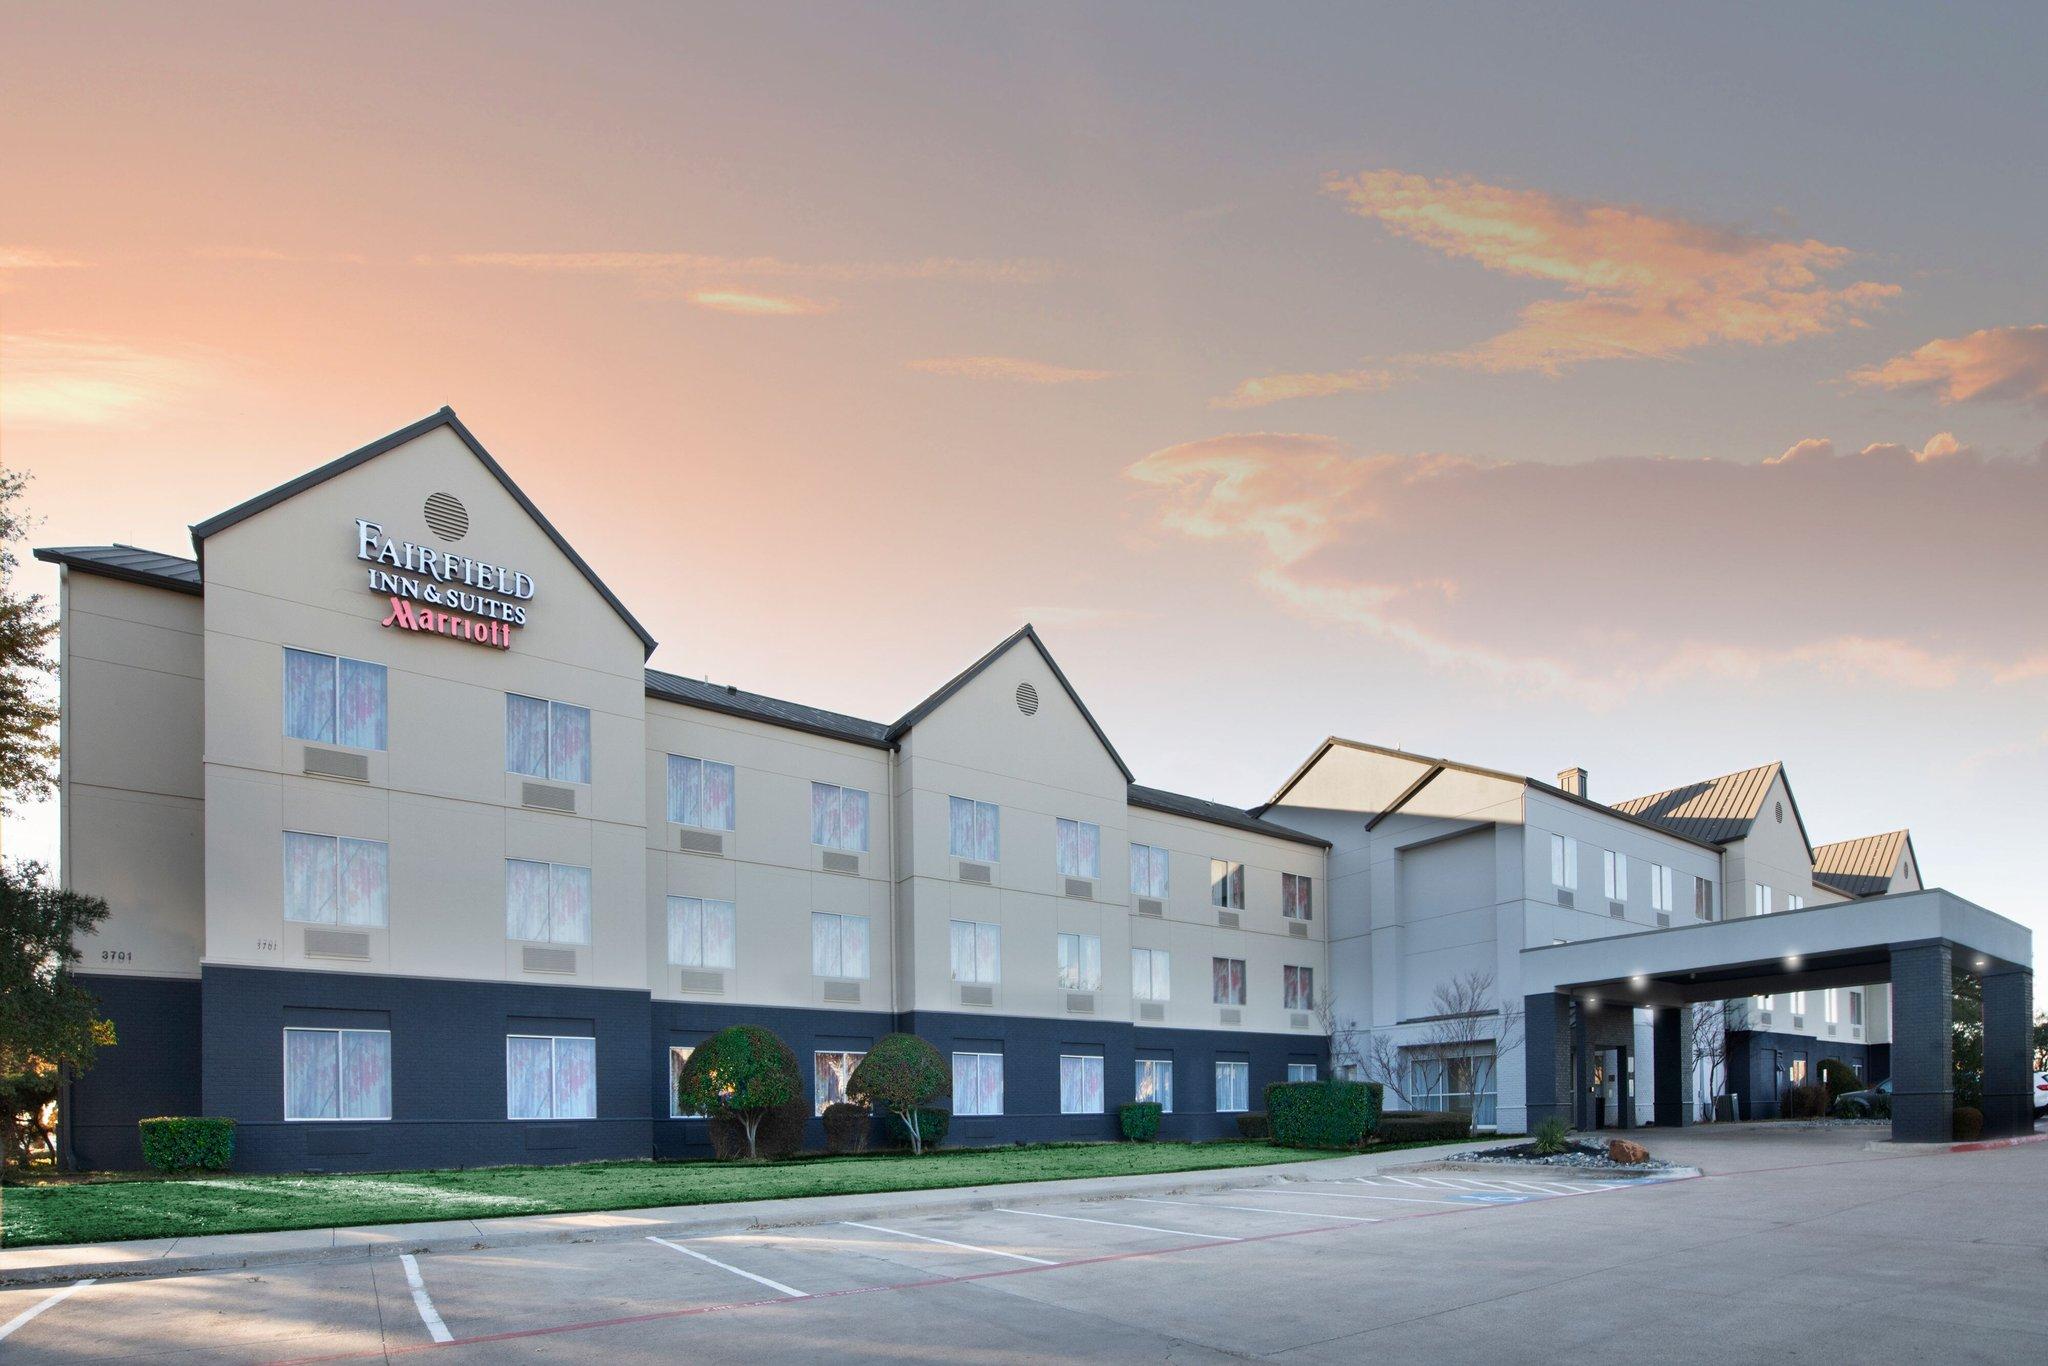 Fairfield Inn & Suites Fort Worth/Fossil Creek in Fort Worth, TX